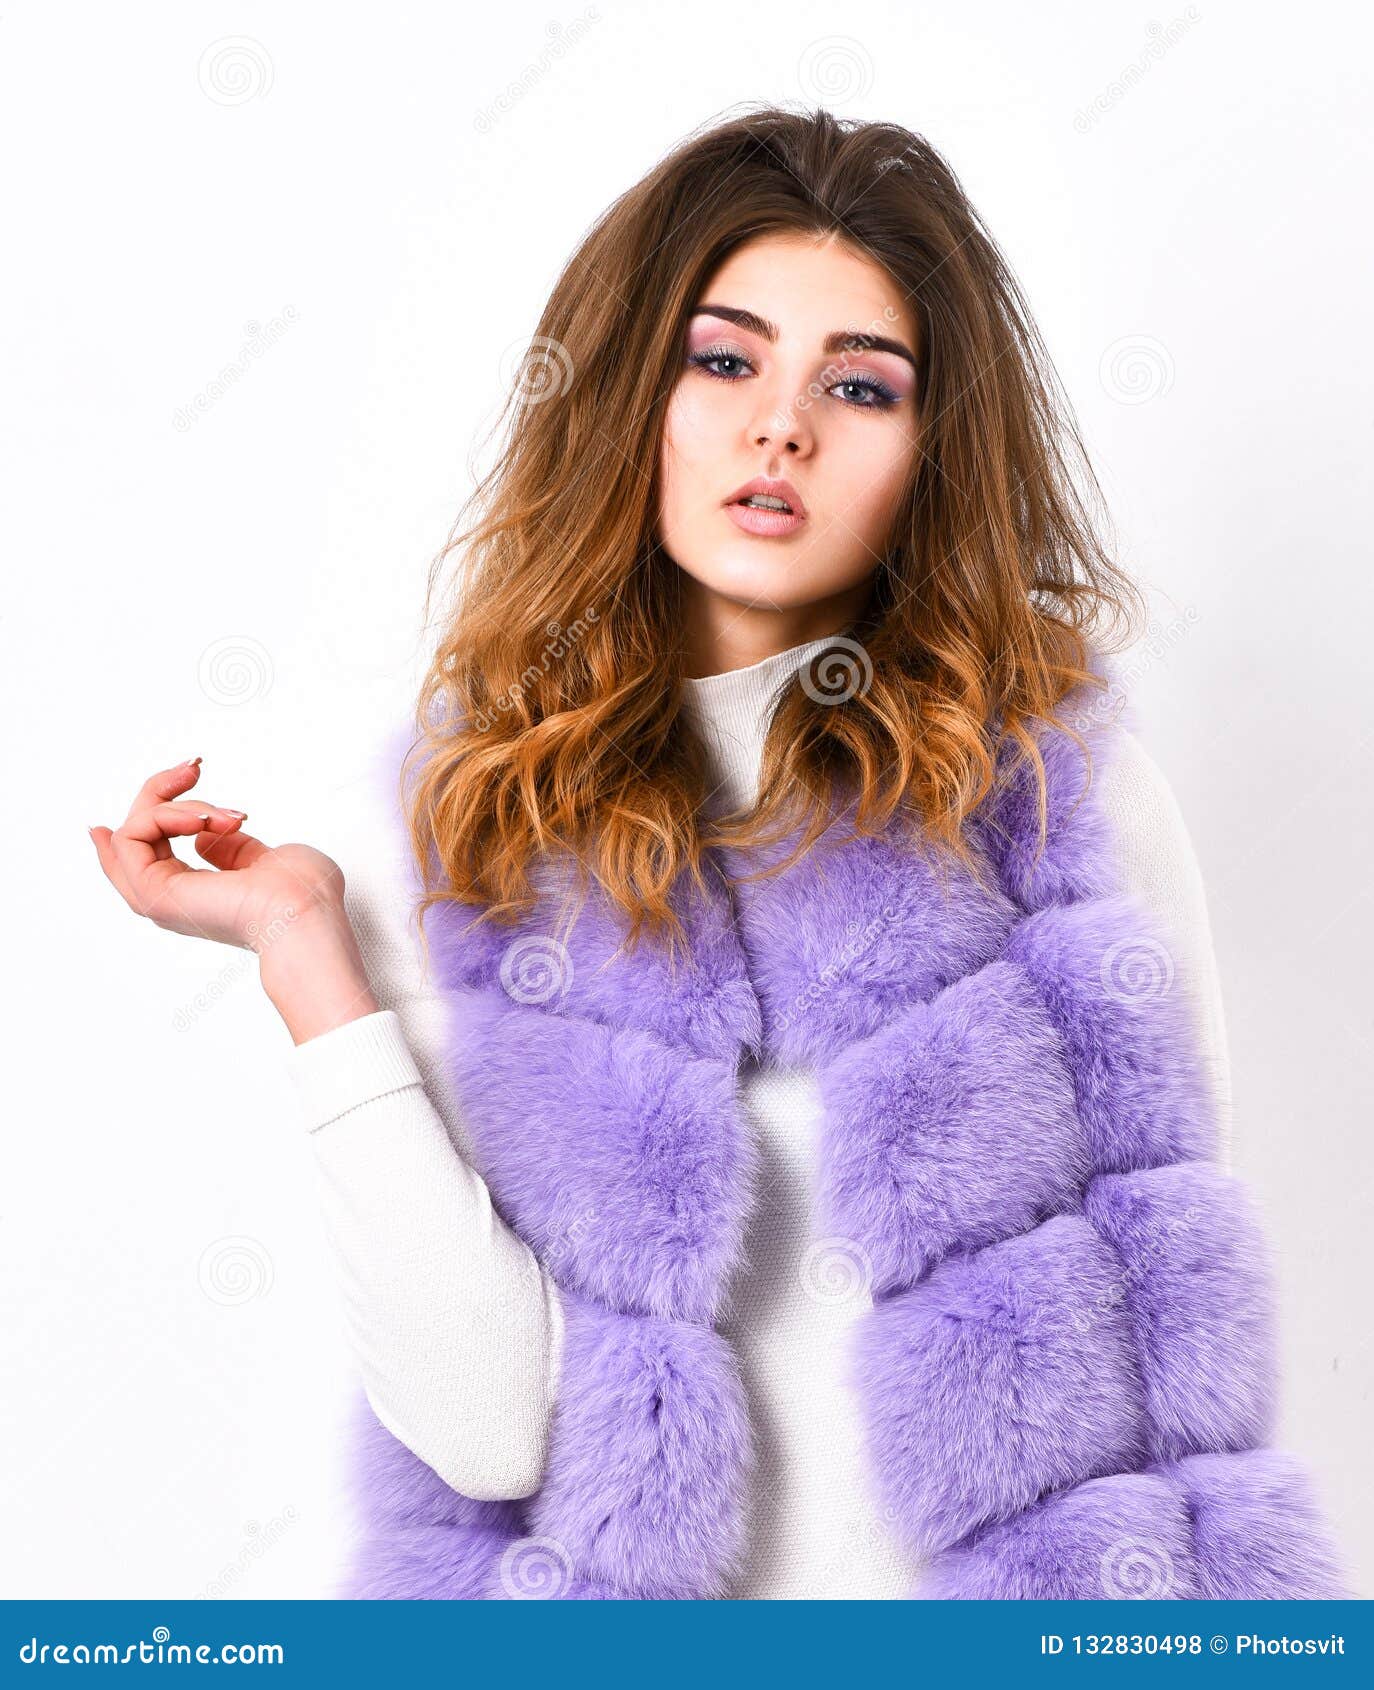 How To Wear a Winter White Outfit - Lady in VioletLady in Violet